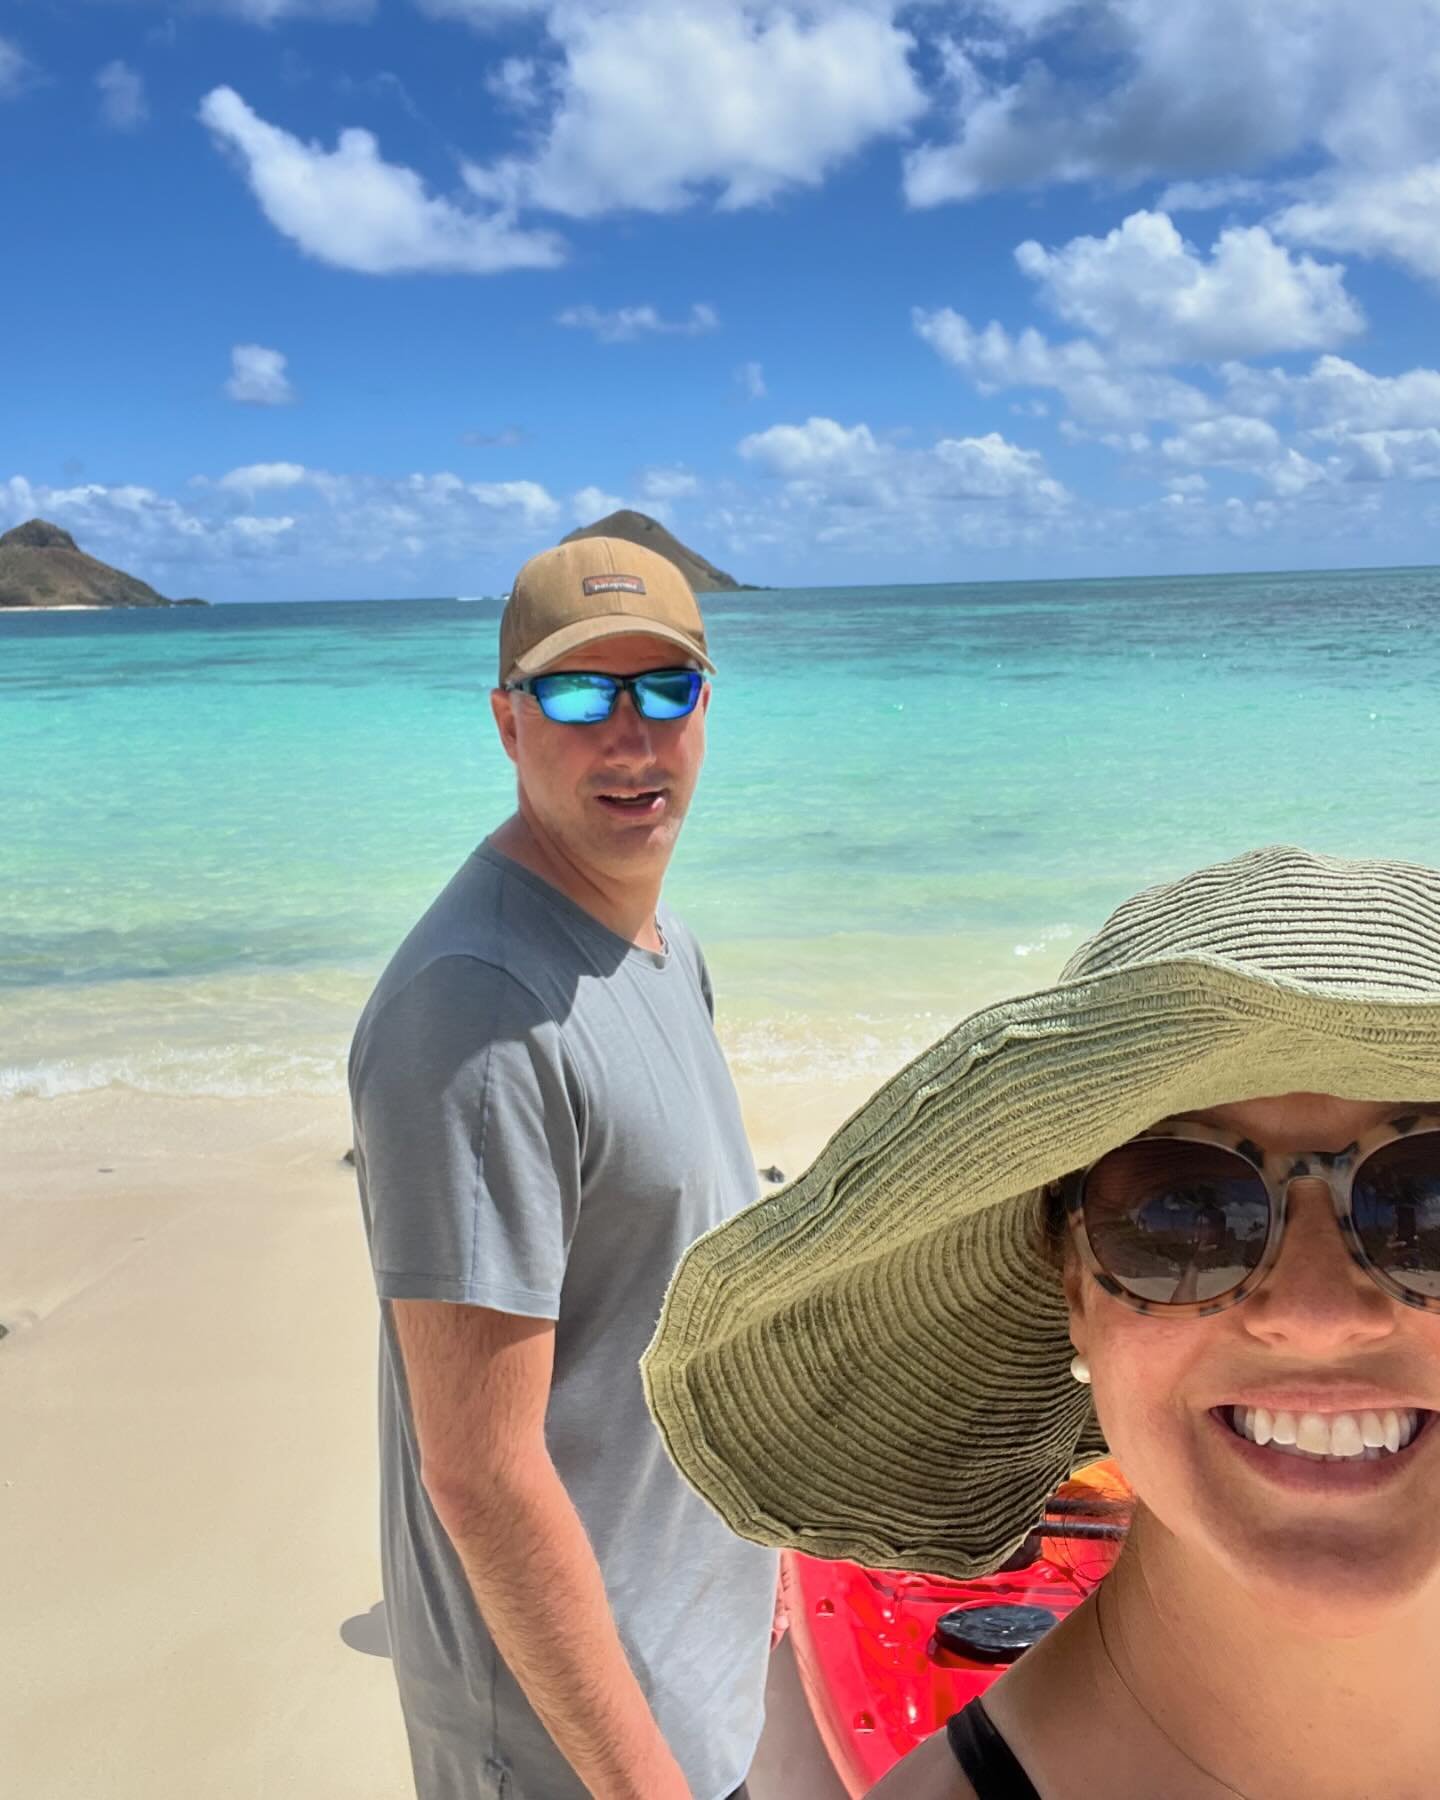 The month of March really outdid herself. So many good gifts and memories and joy-filled days. 🩷

🏝️ Hawaii for our 25th with @markoshman. 
🌮 Epic night at @casabonitaofficial. 
🤩 Hannah&rsquo;s musical performance.
👰&zwj;♀️ Bridal shower for @z